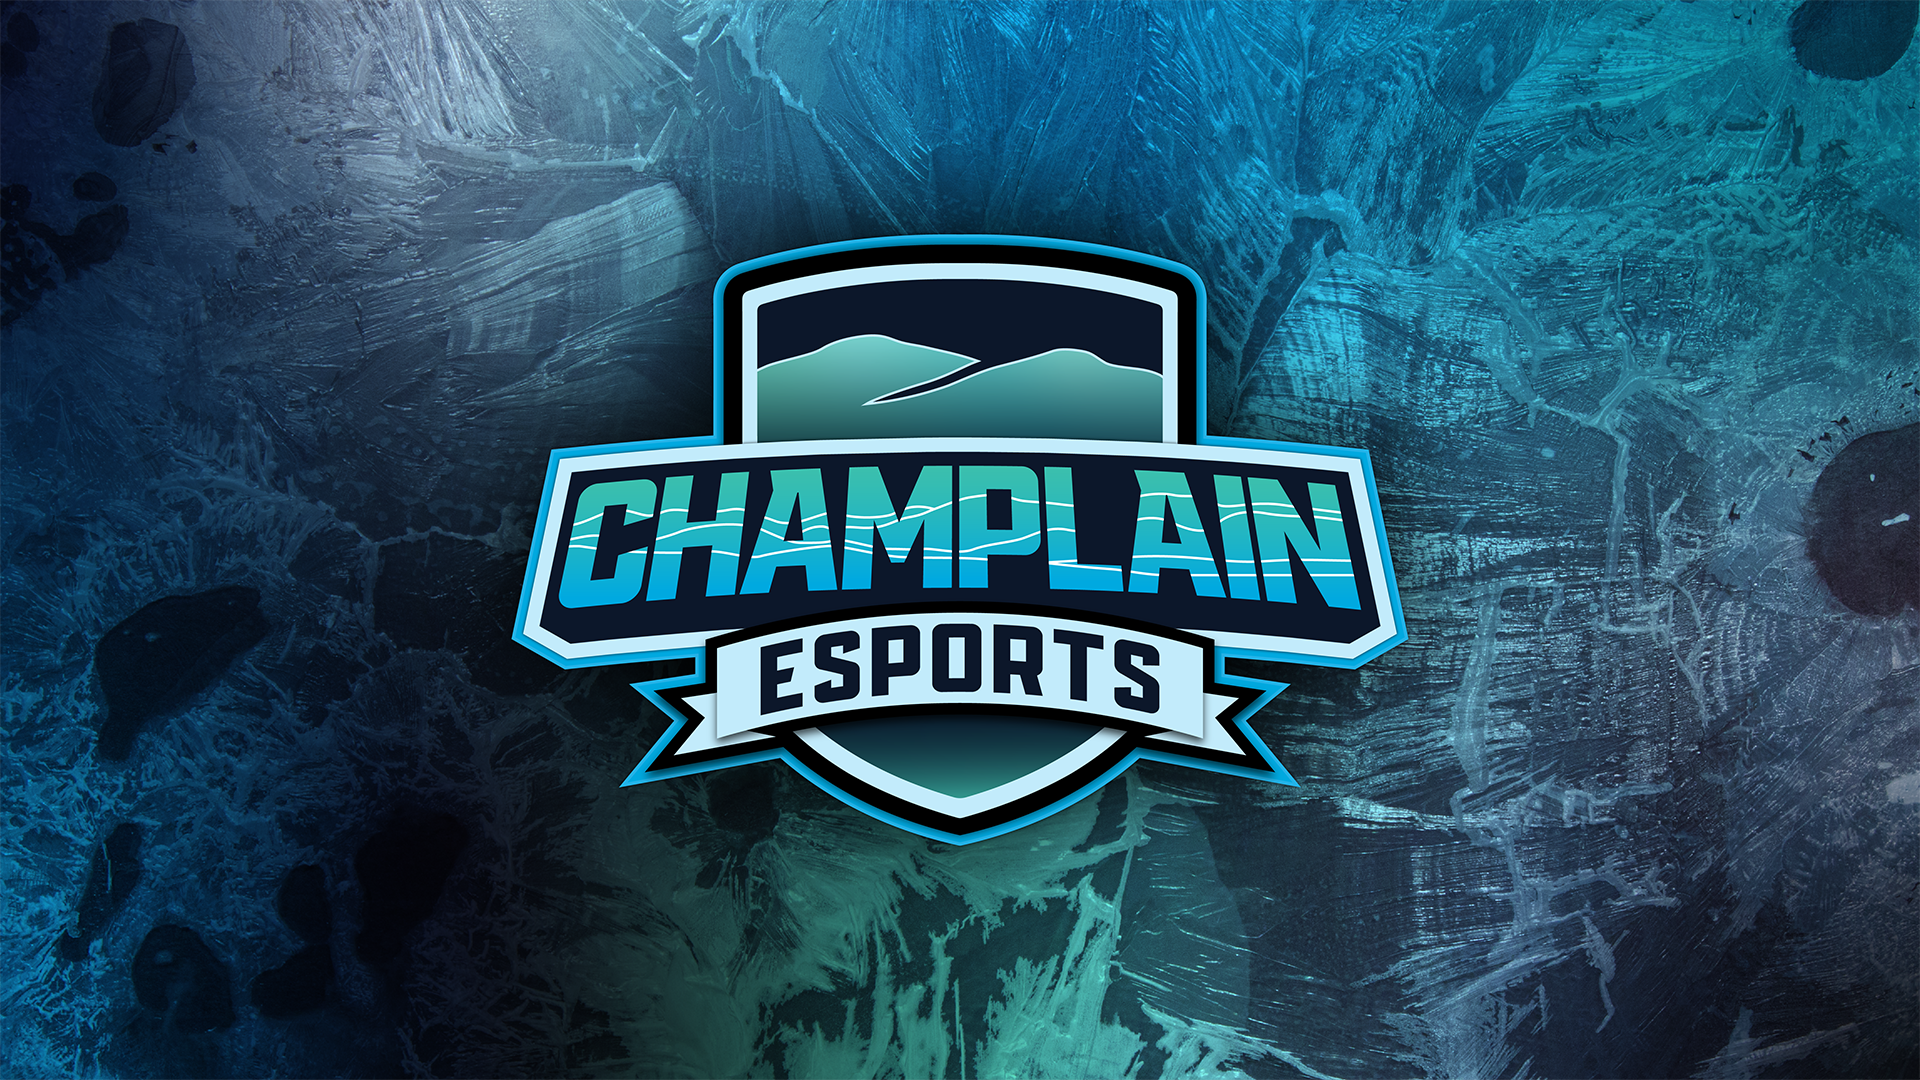 Champlain College Esports Shield over an Icy Blue Background